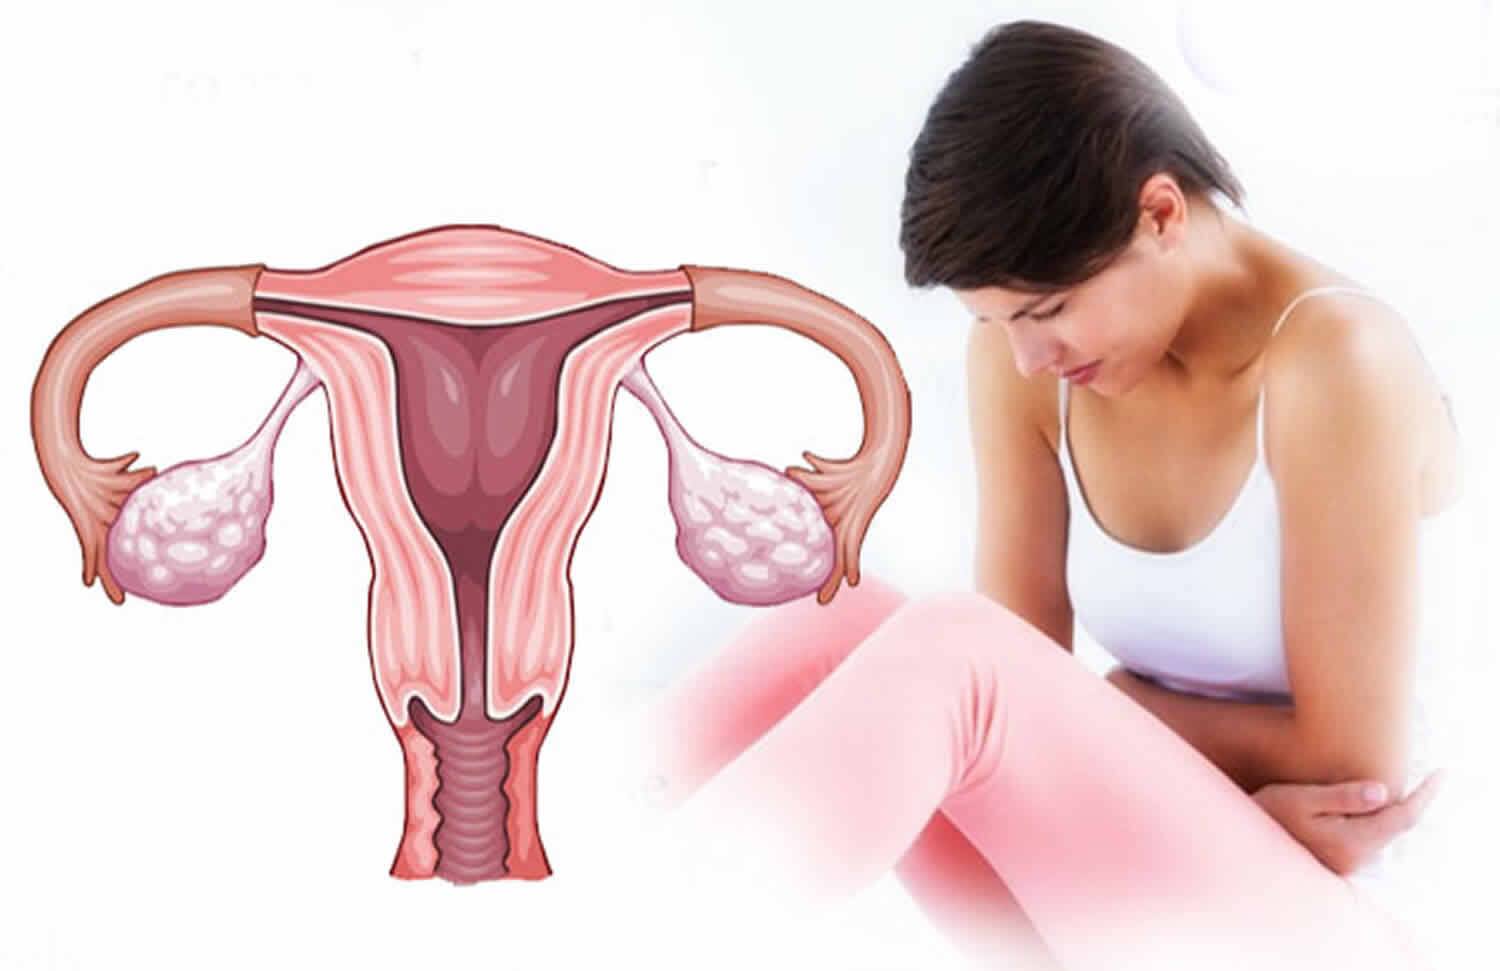 SGO on X: Signs of #VaginalCancer include unusual vaginal bleeding,  bleeding after vaginal sex, pain, problems with urination or bowel  movements, a watery discharge, or a lump or mass in the vagina.